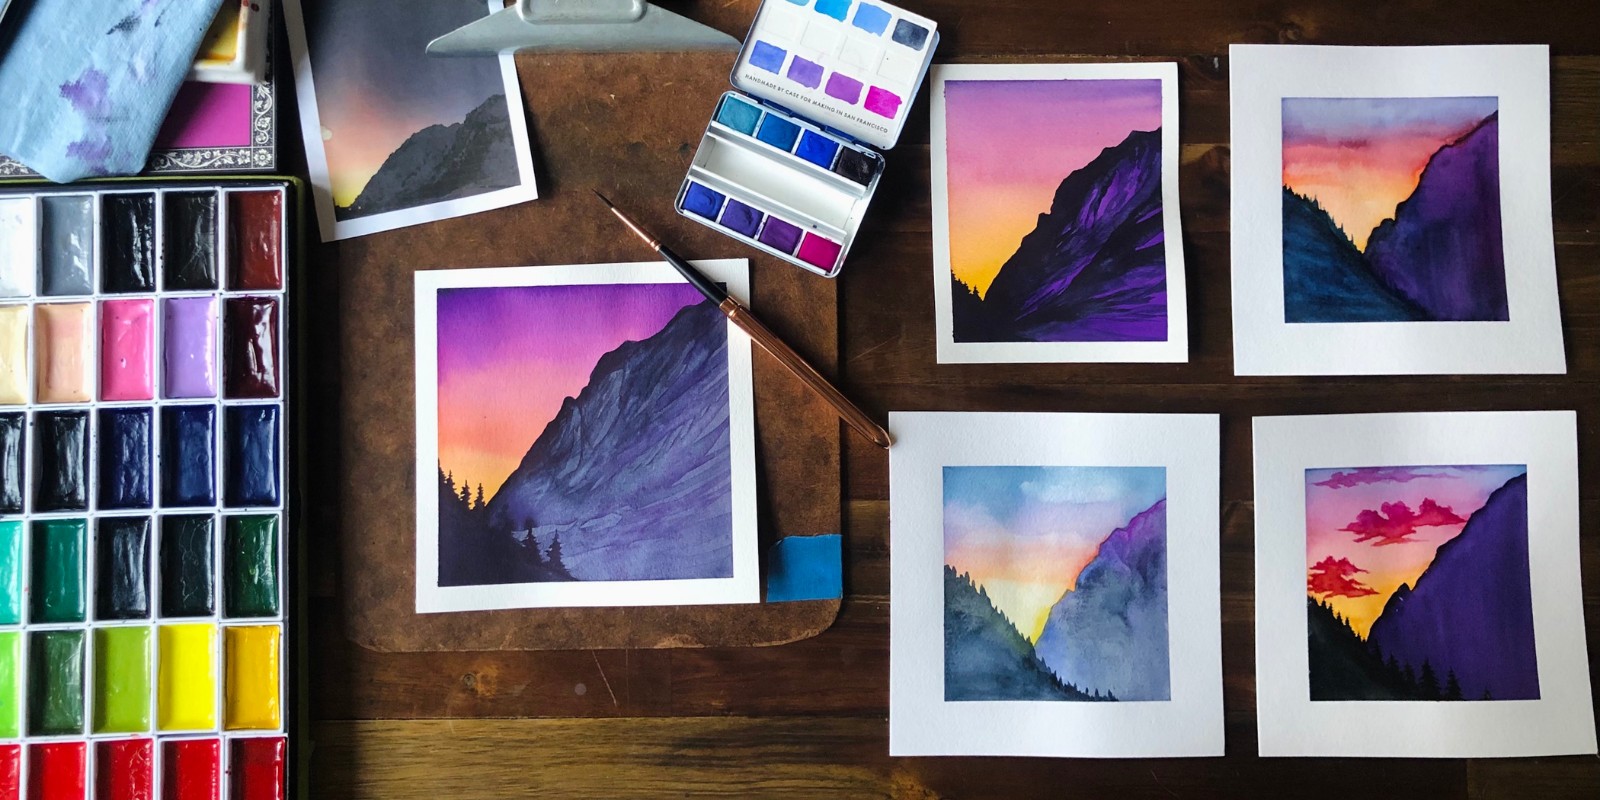 Watercolor 101: How to Paint a Simple Mountain Scene